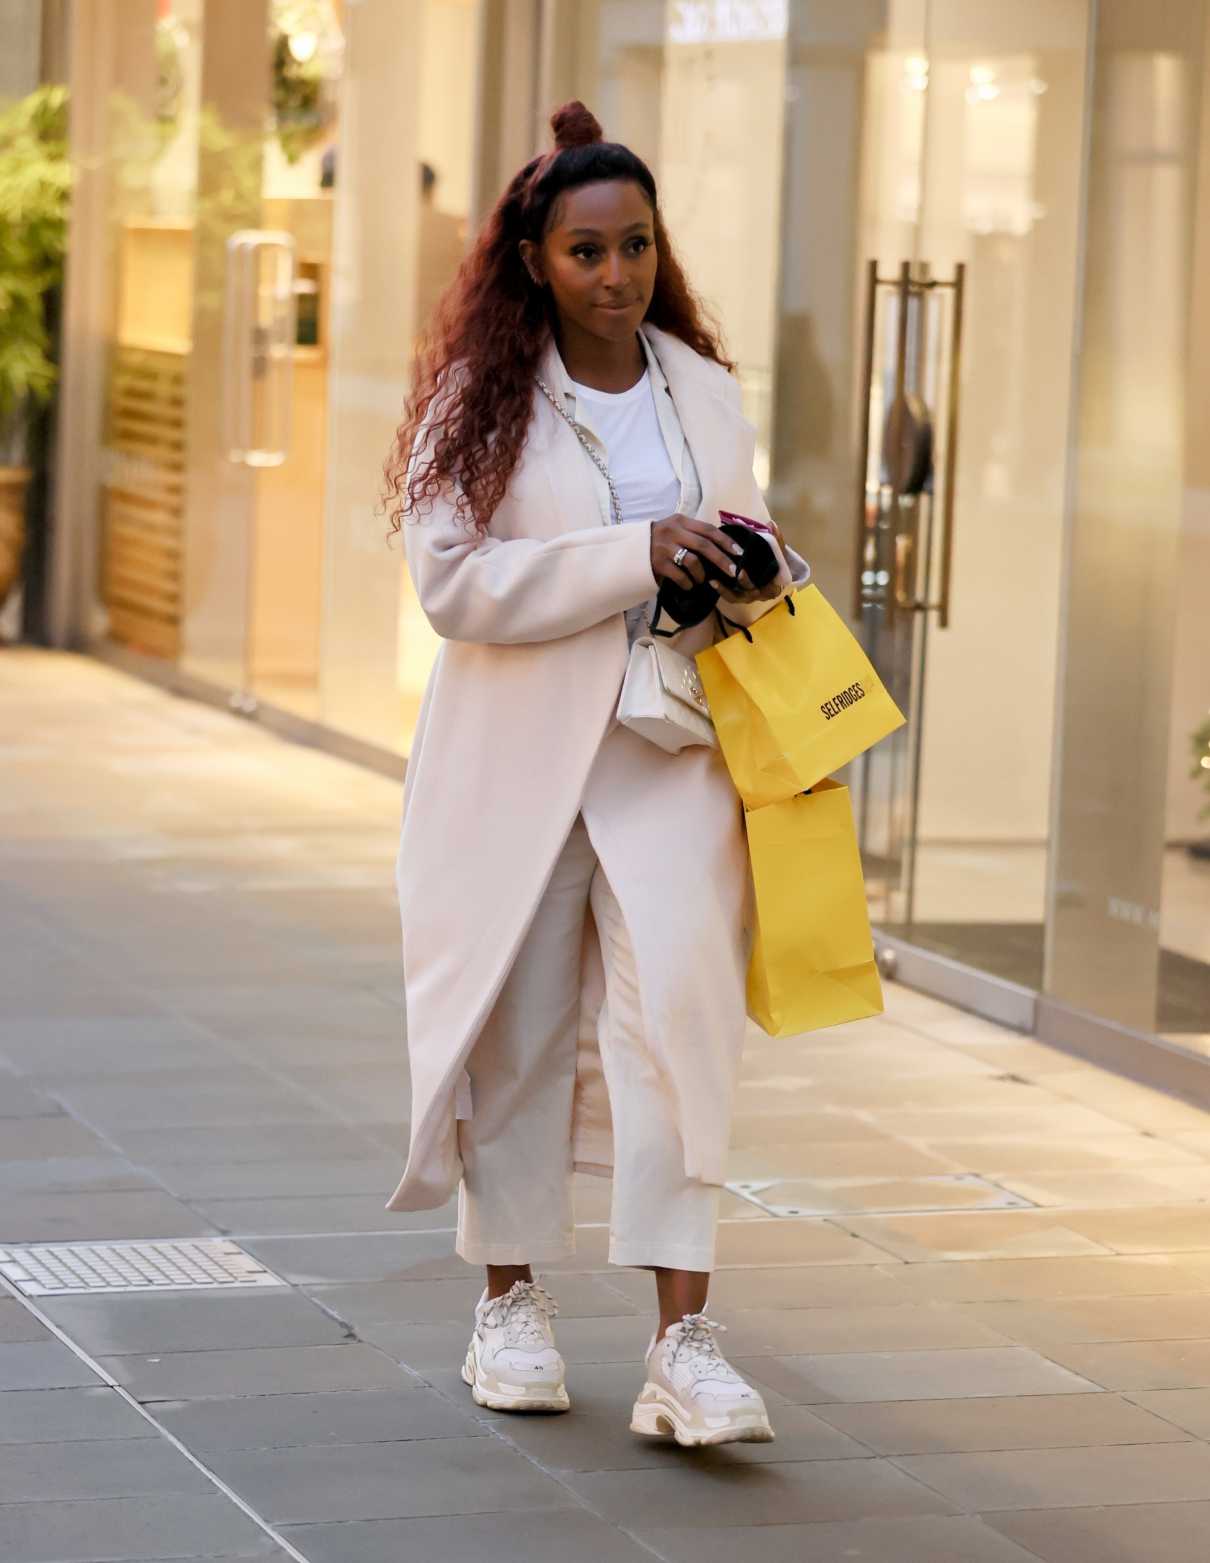 Alexandra Burke in a White Outfit